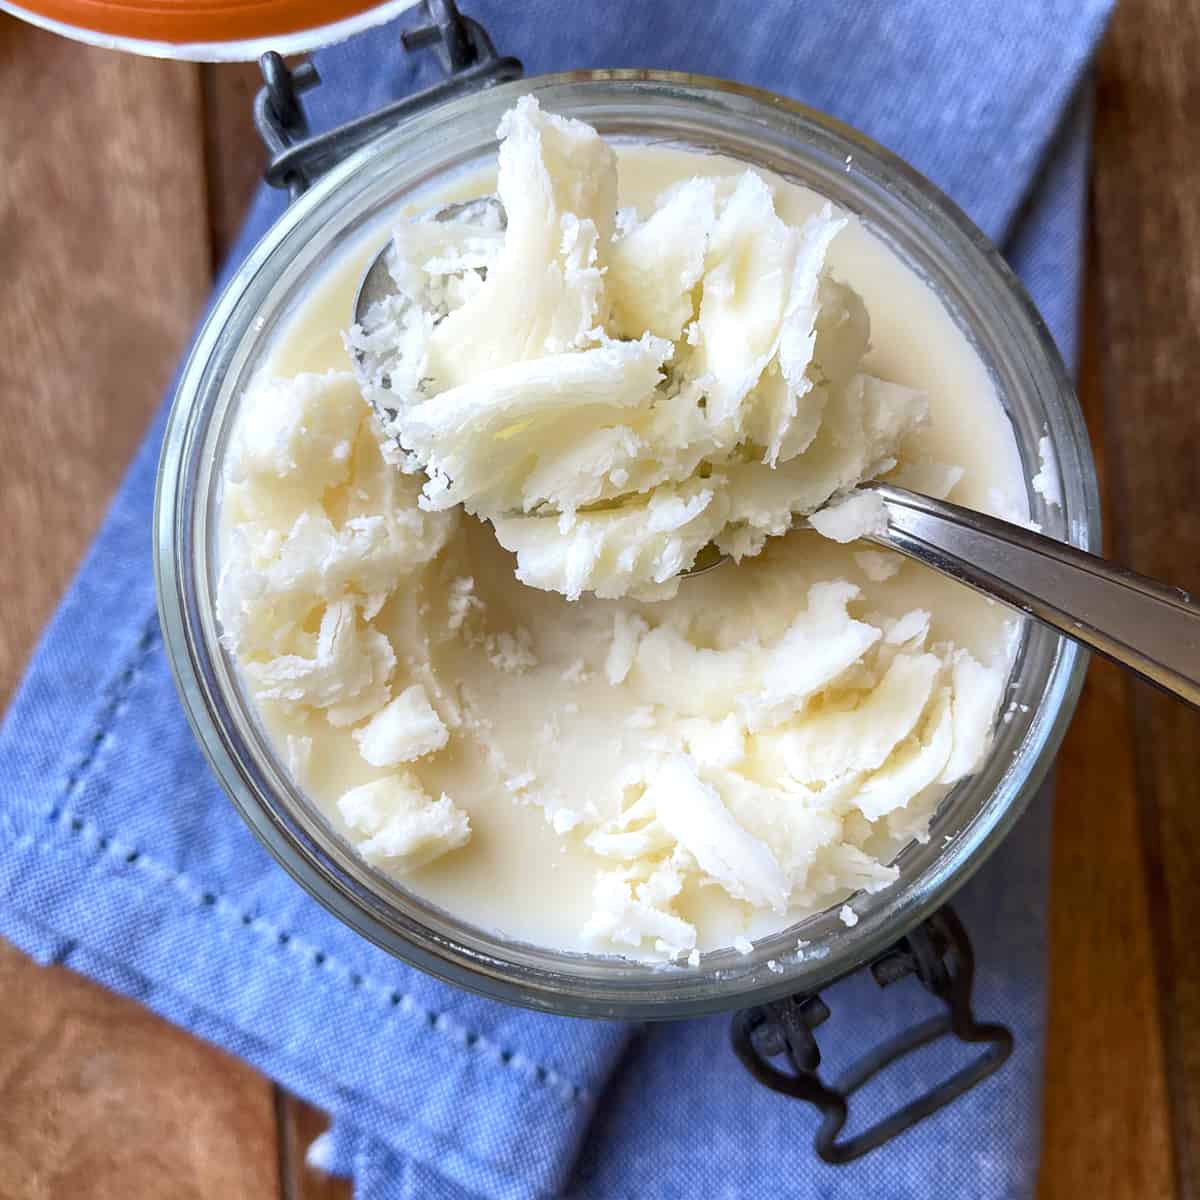 How to Make Beef Tallow